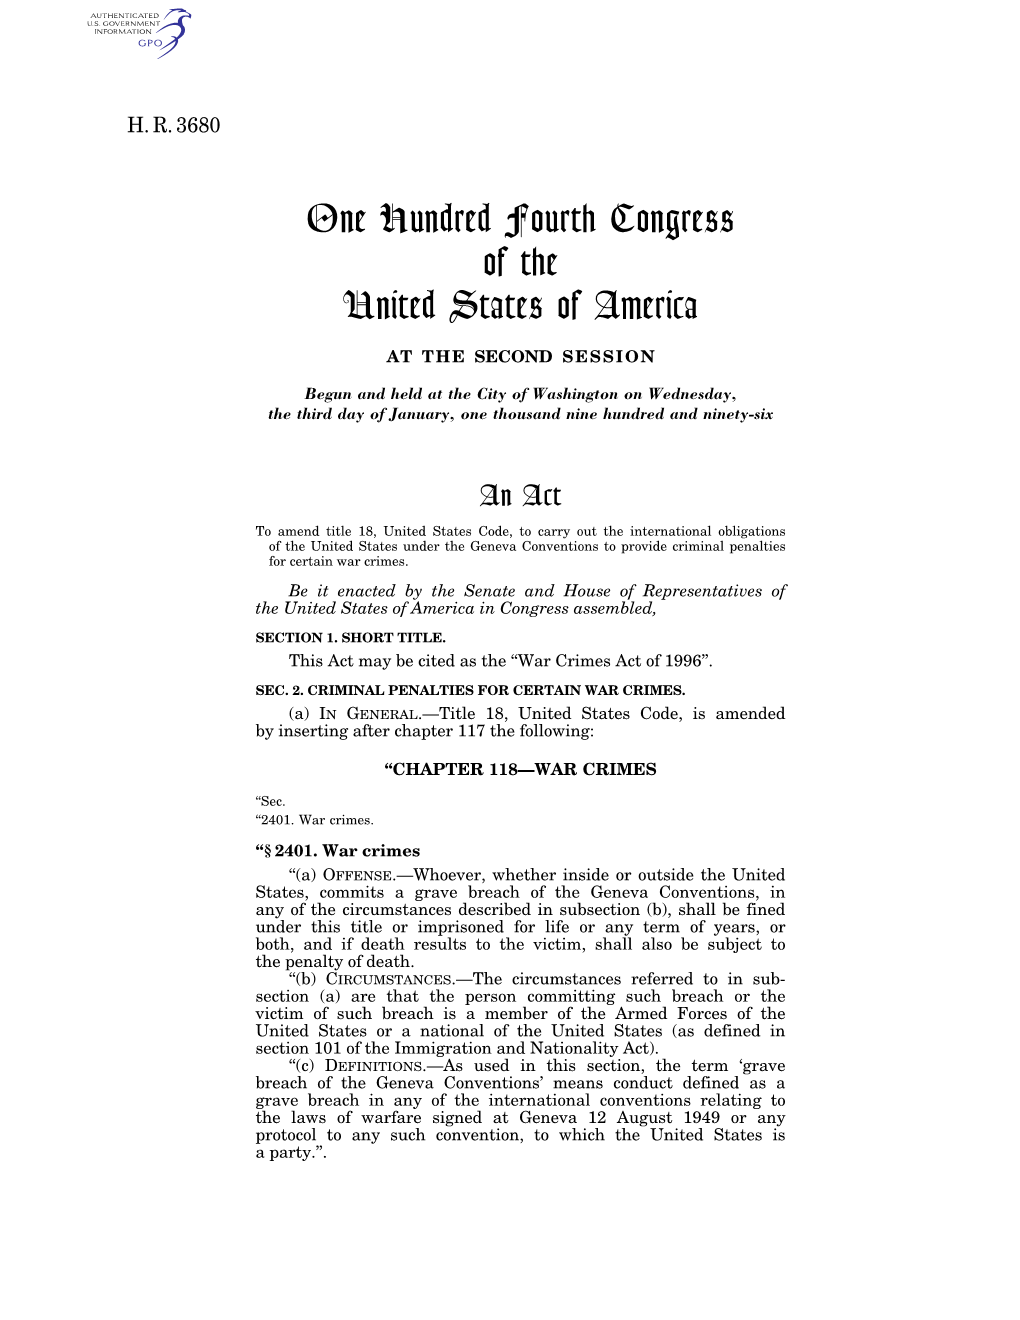 One Hundred Fourth Congress of the United States of America